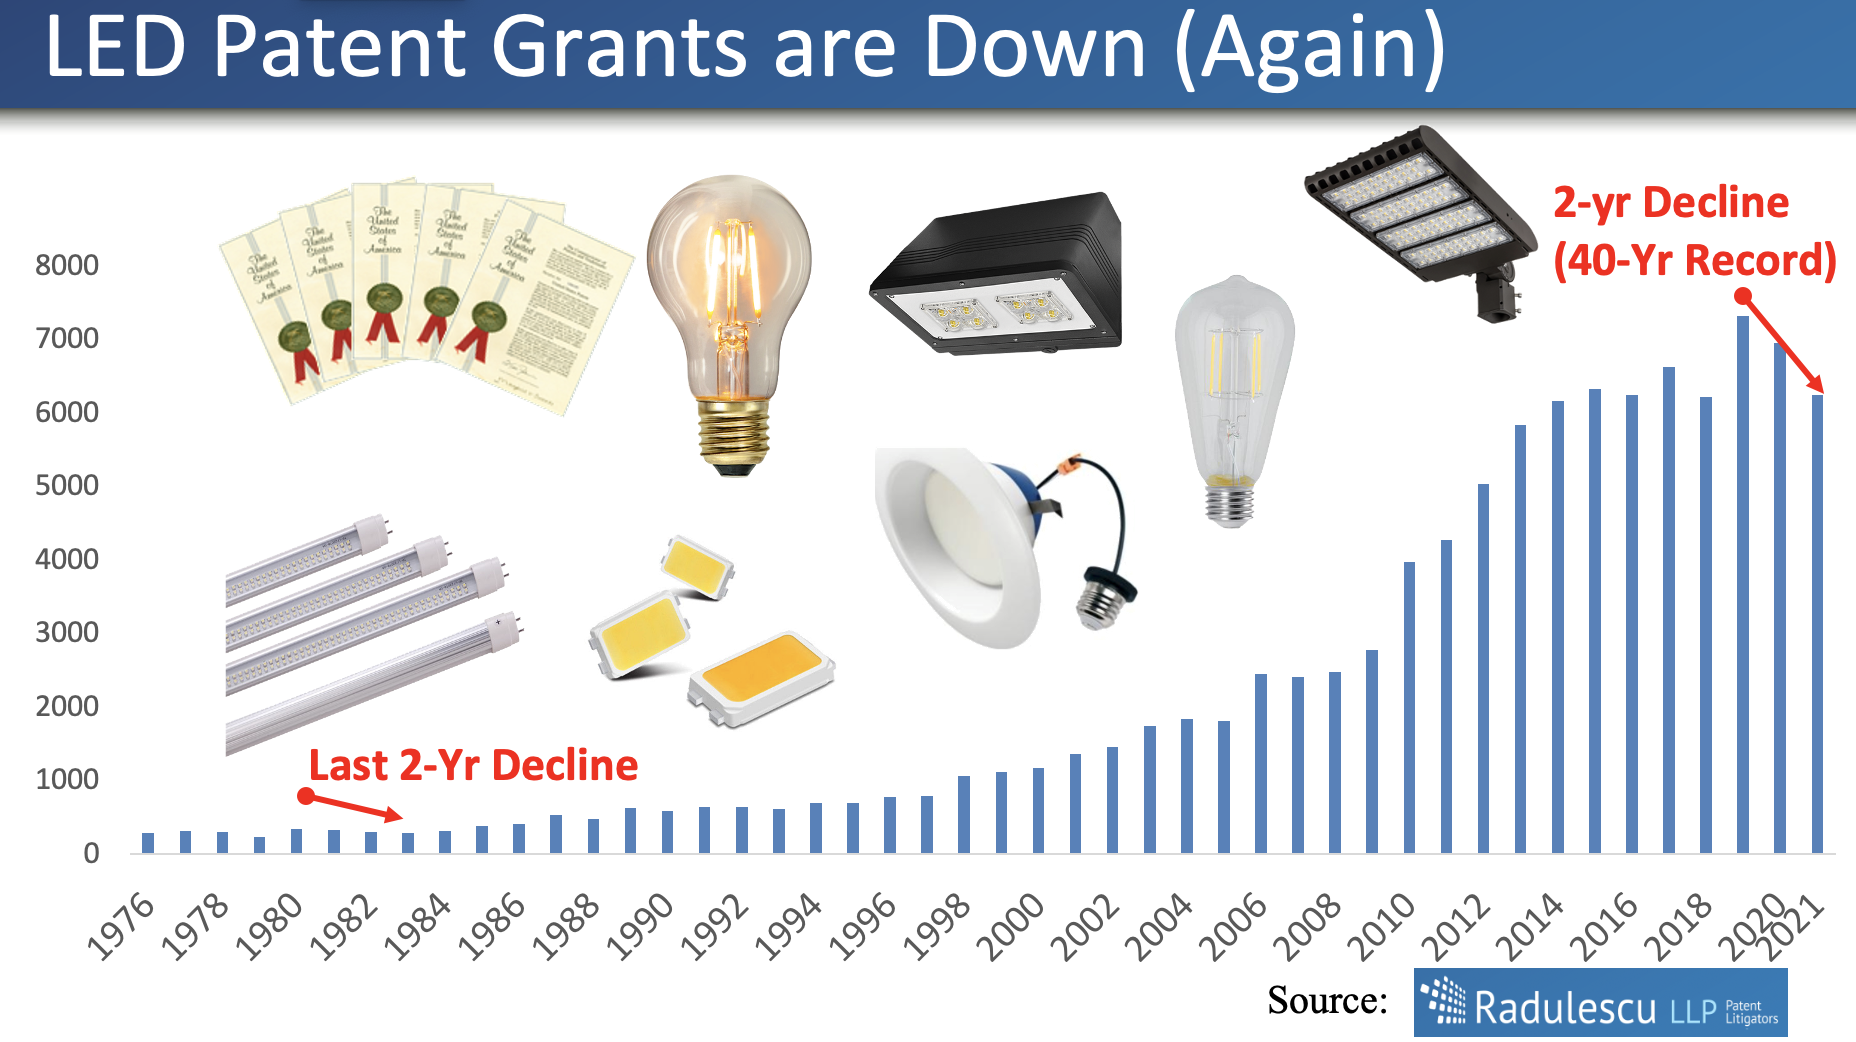 LED Patent Grants are Down Again